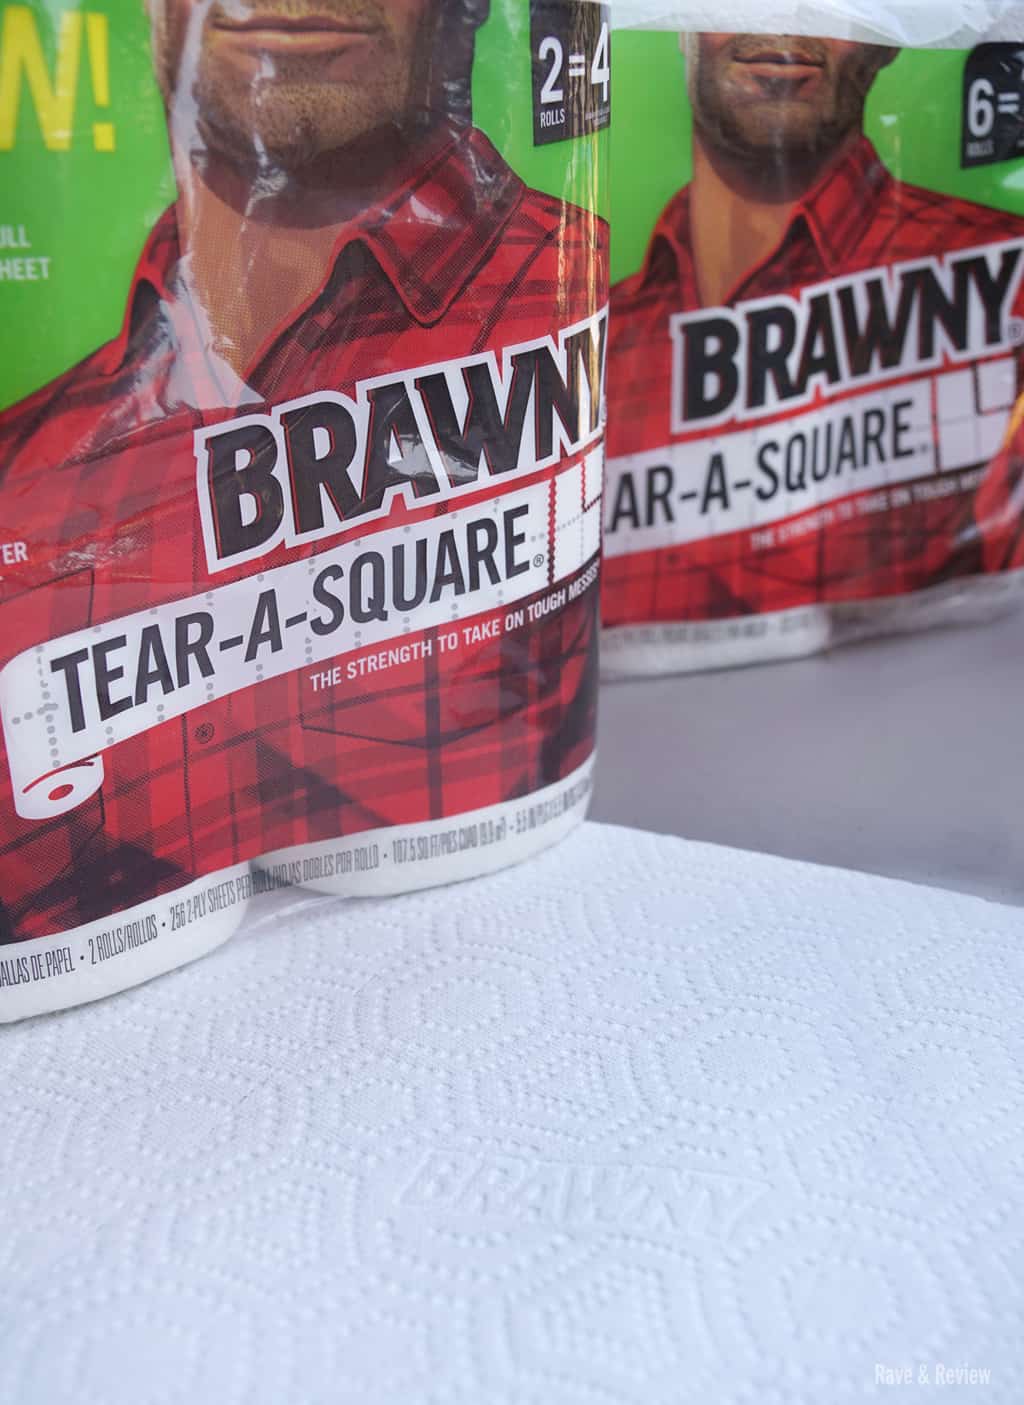 Brawny tear a square Lunchbox love: origami paper towels